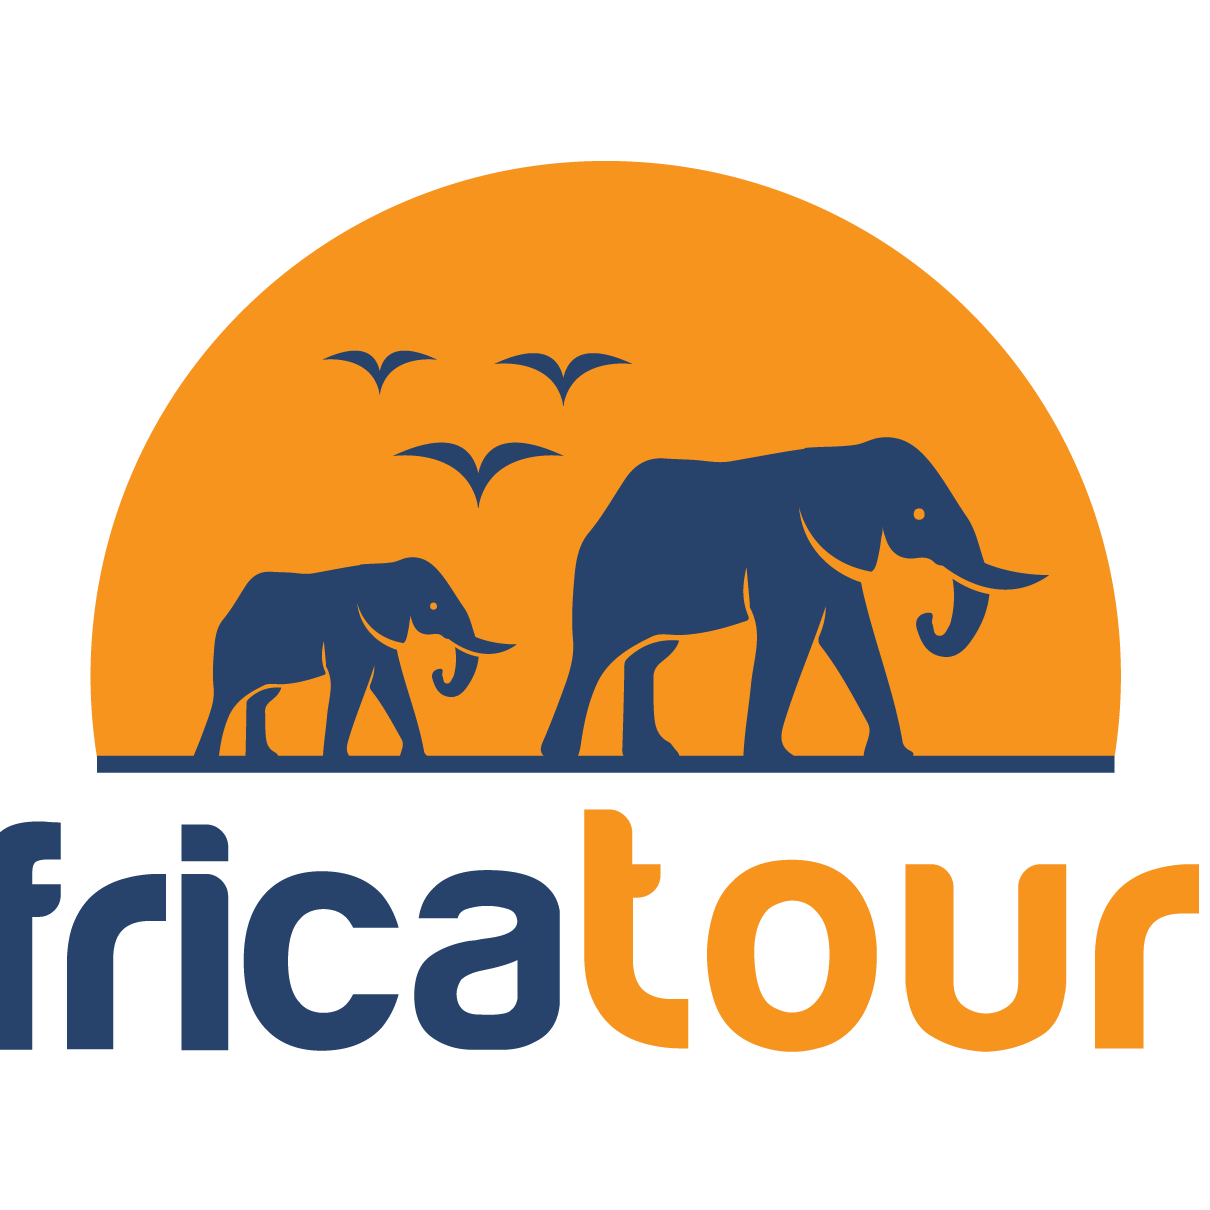 Africa Tours